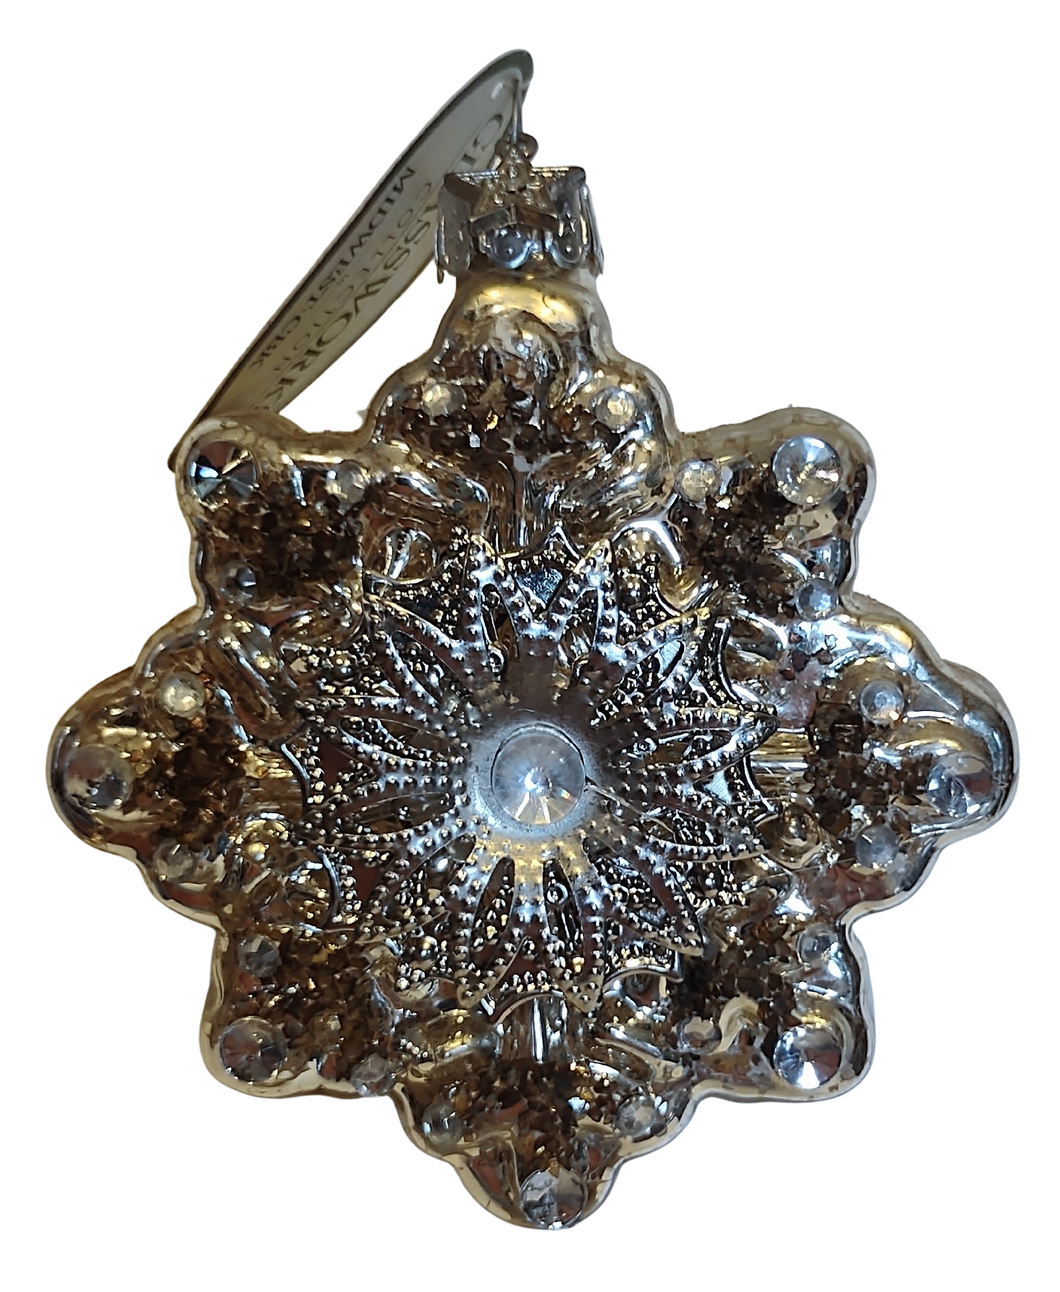 Glass Silver Snowflake Ornament with Flower in Center 4